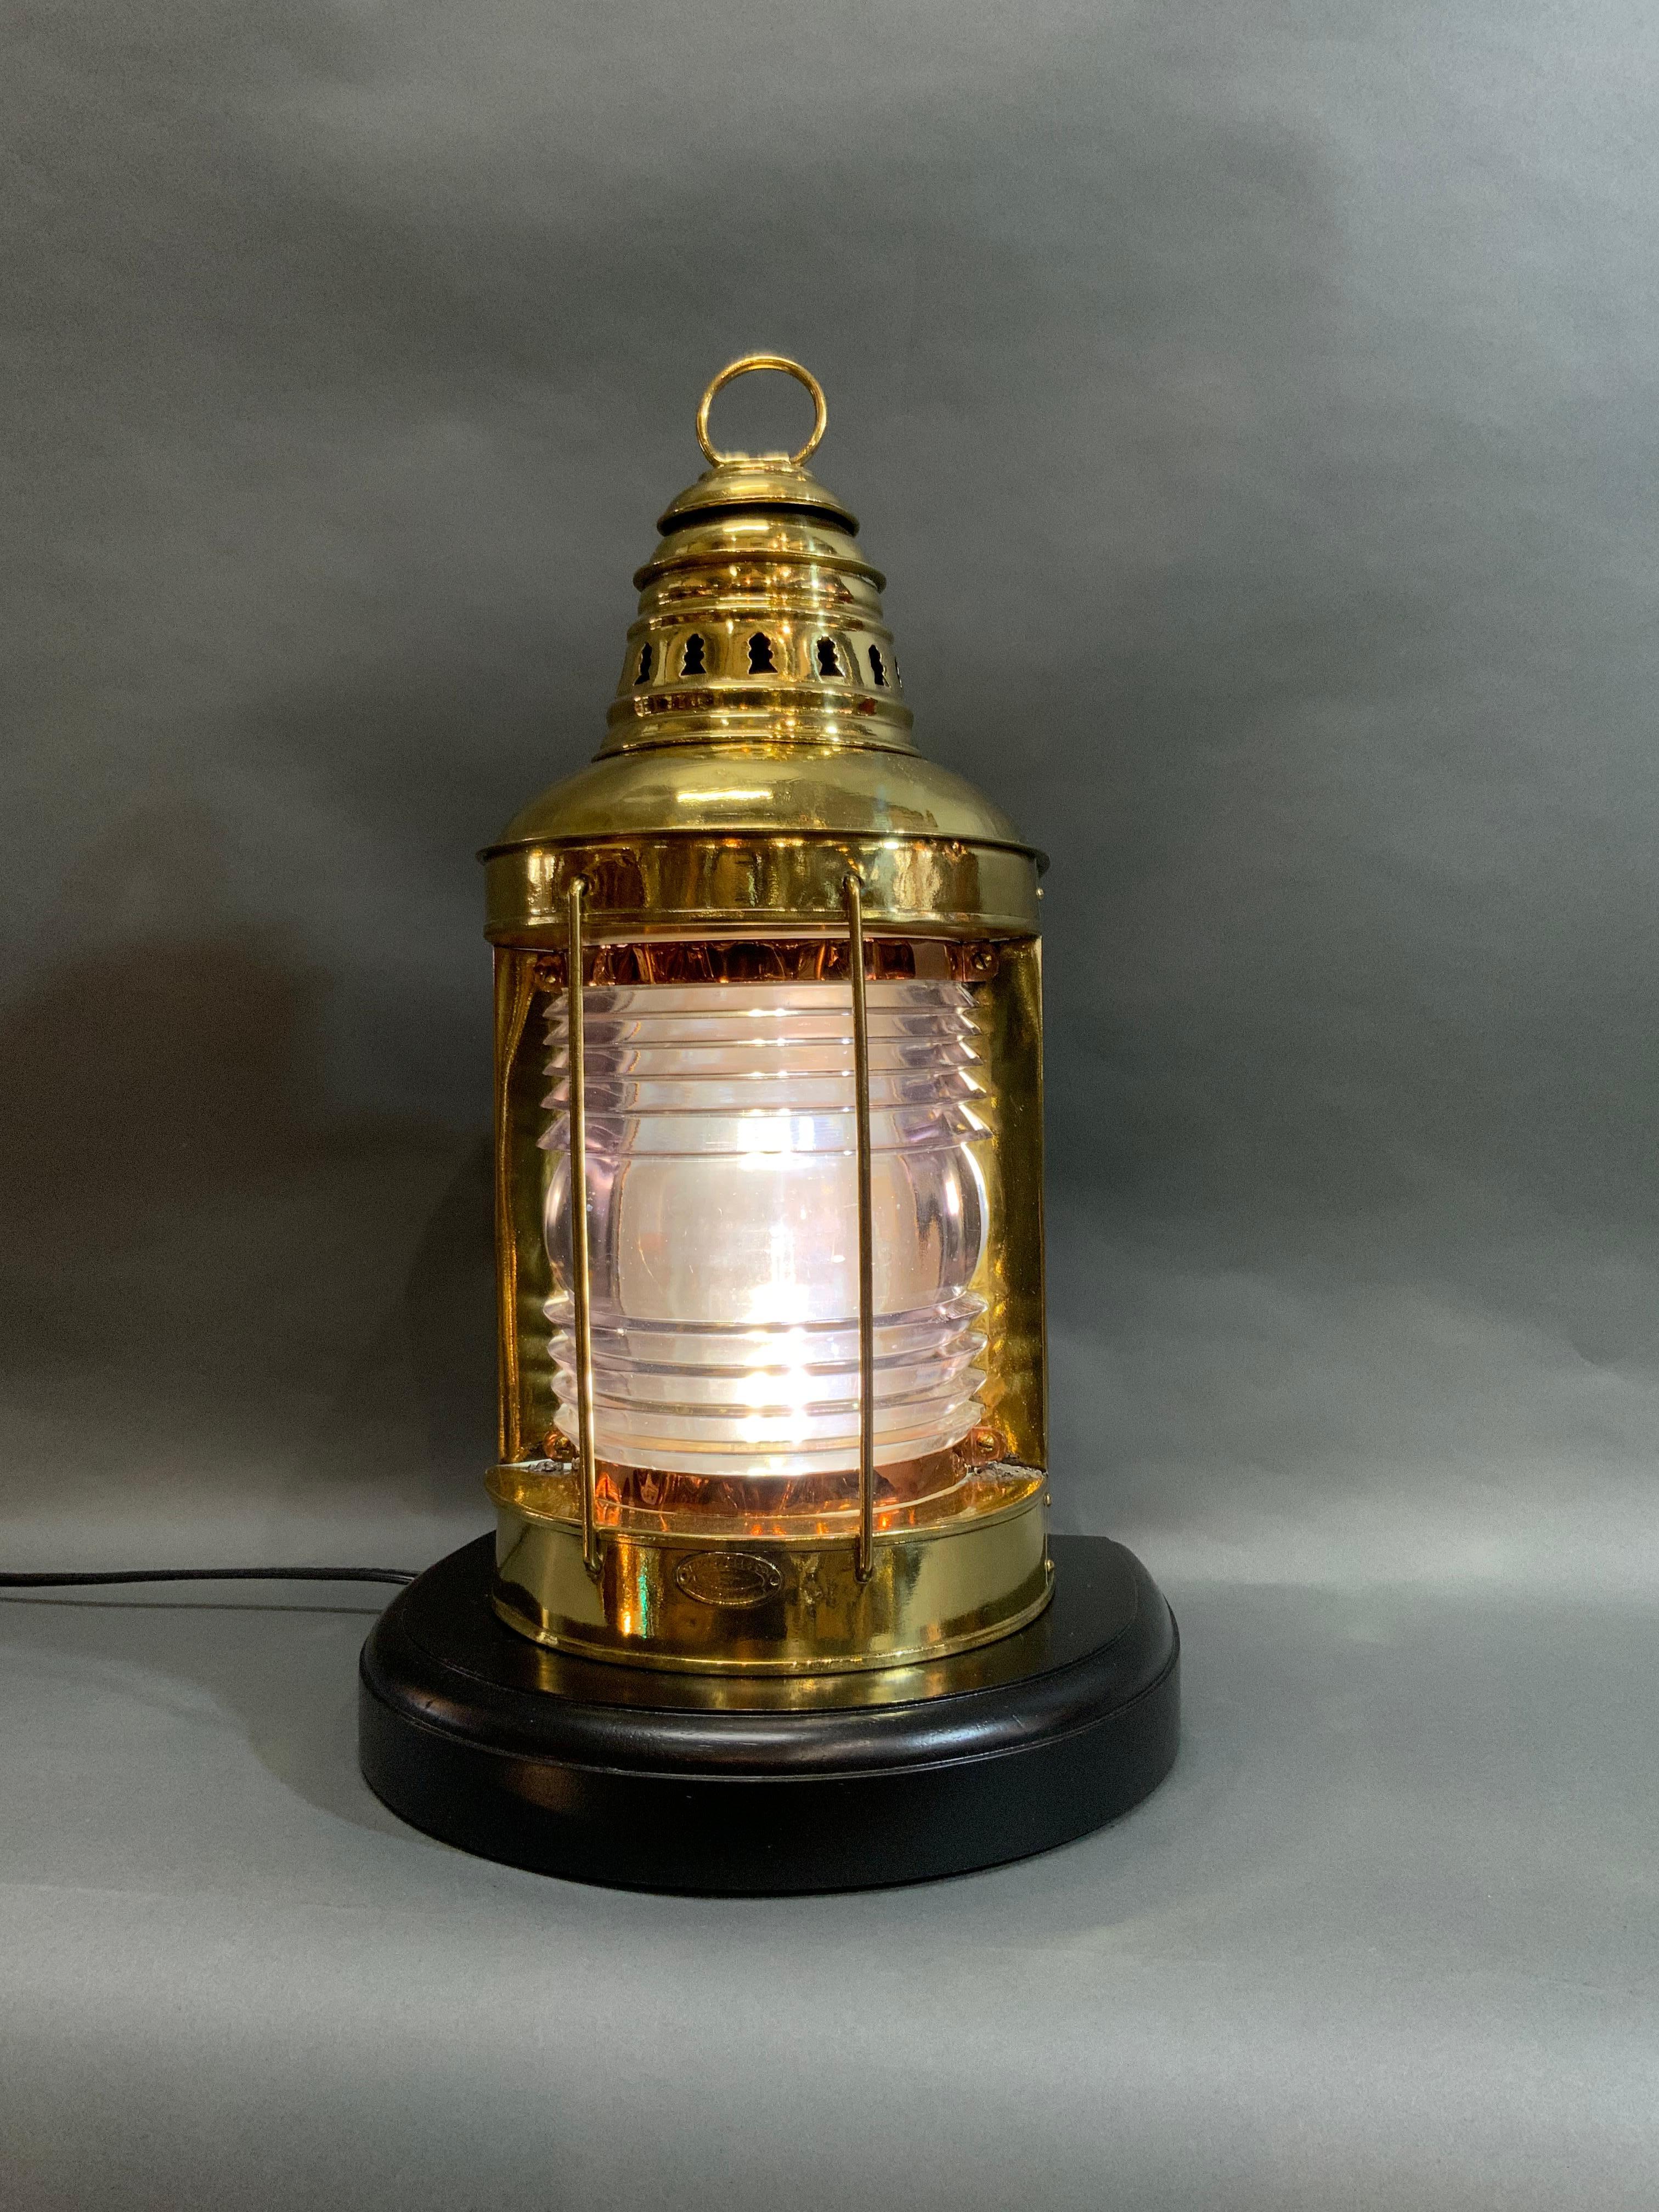 Maritime lantern by F.H. Lovell of solid brass with protective brass bars and glass Fresnel lens. Vented top and original hoisting ring. Mounting bracket to backside. Great nautical lantern that has been wired with socket for home use and mounted to